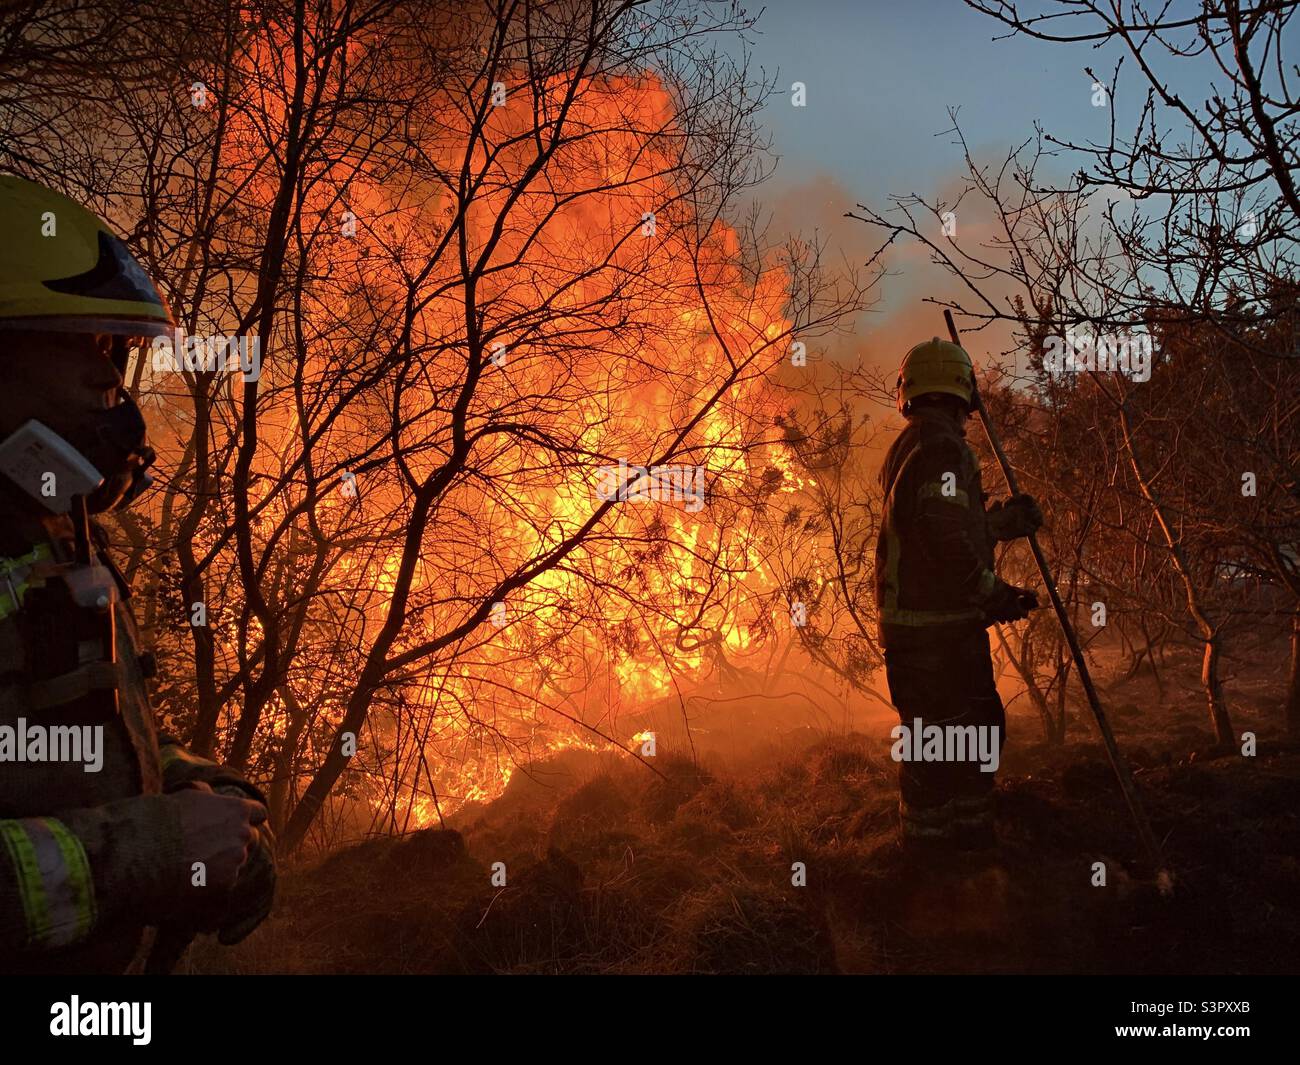 Firefighters tackle a wildfire on Heathland near Yateley in Hampshire, England. Stock Photo